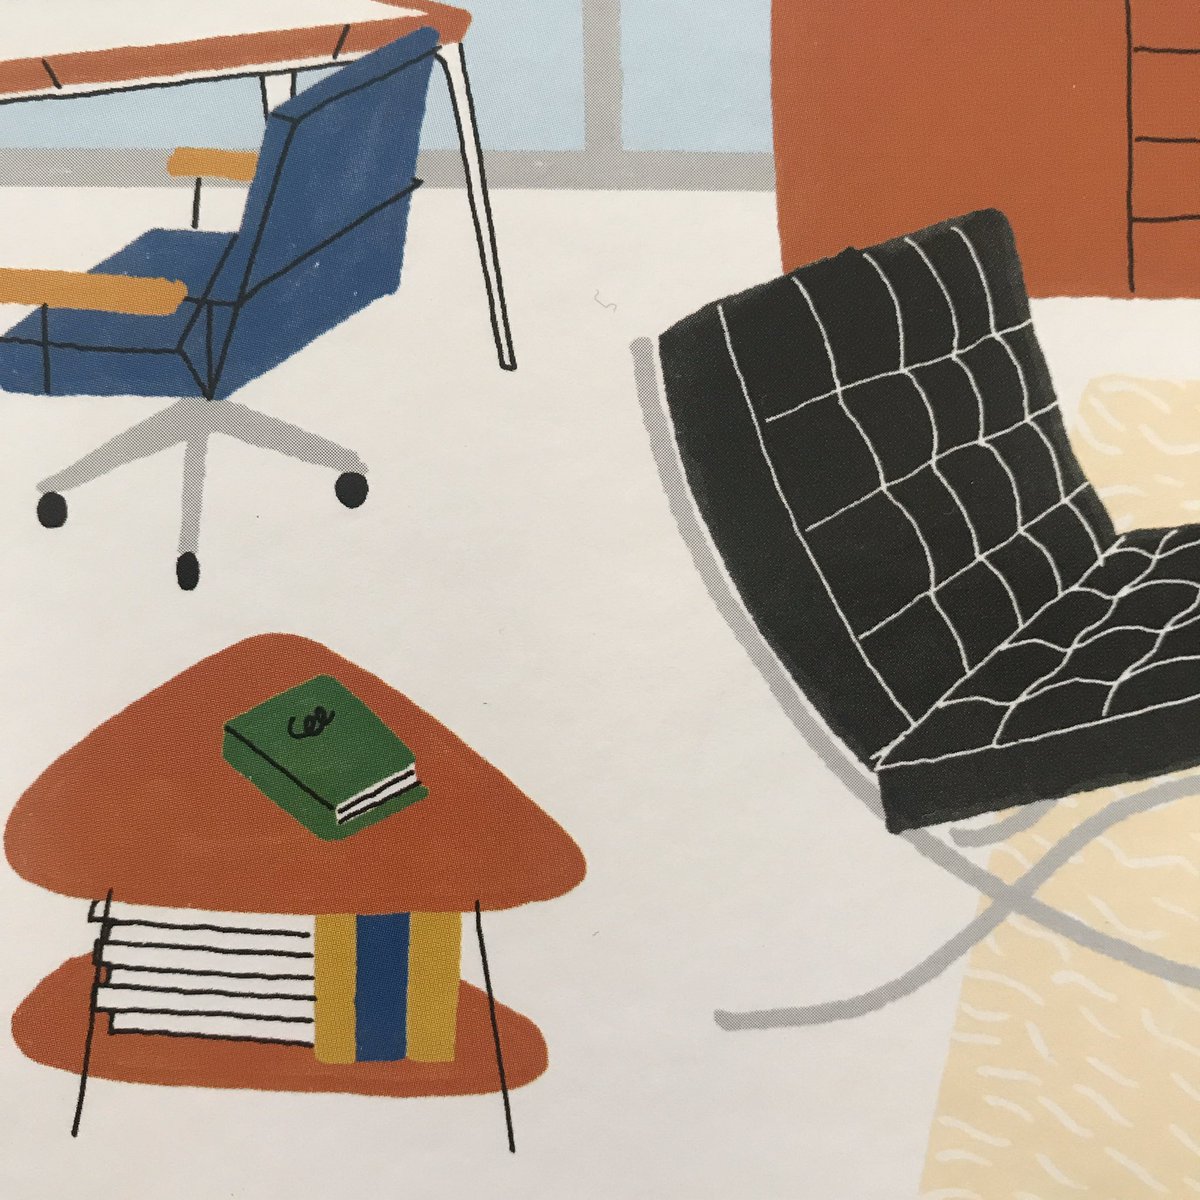 Where might books end up once they are taking home? Some may end up as Modernist room dressing, like this one  #booksinchildrensbooks